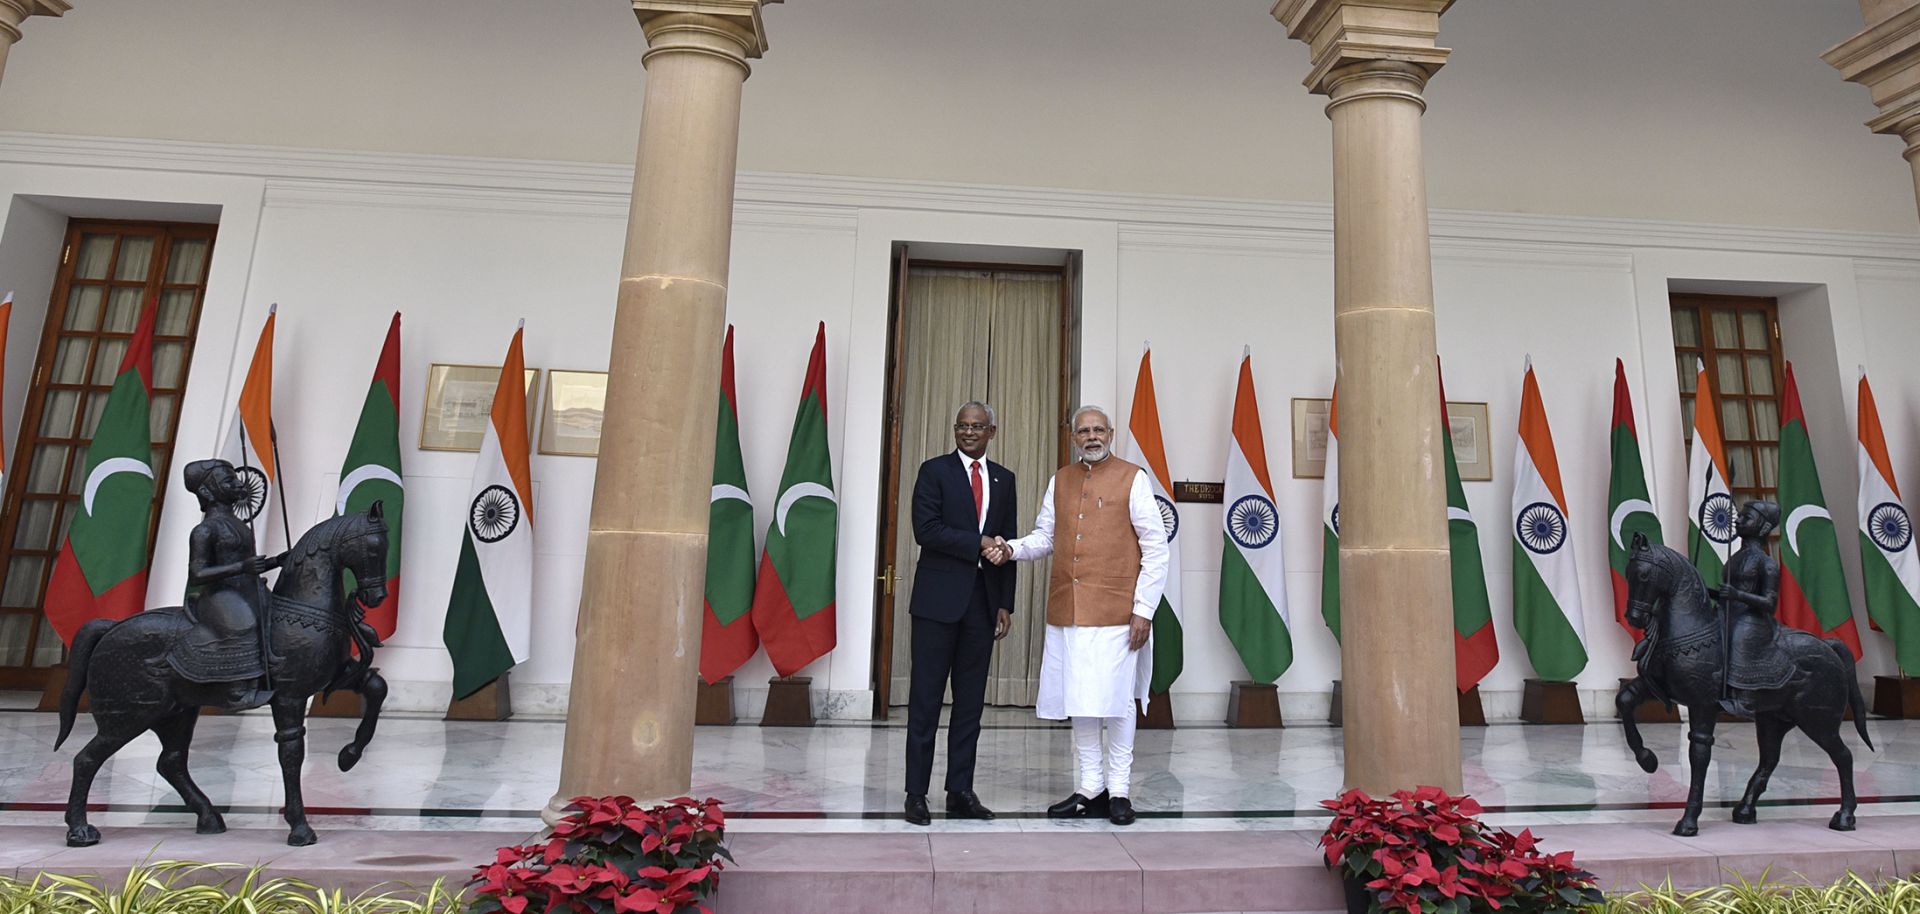 Indian Prime Minister Narendra Modi and Maldivian President Ibrahim Mohamed Solih shake hands before a meeting on Dec. 17, 2018, in New Delhi.